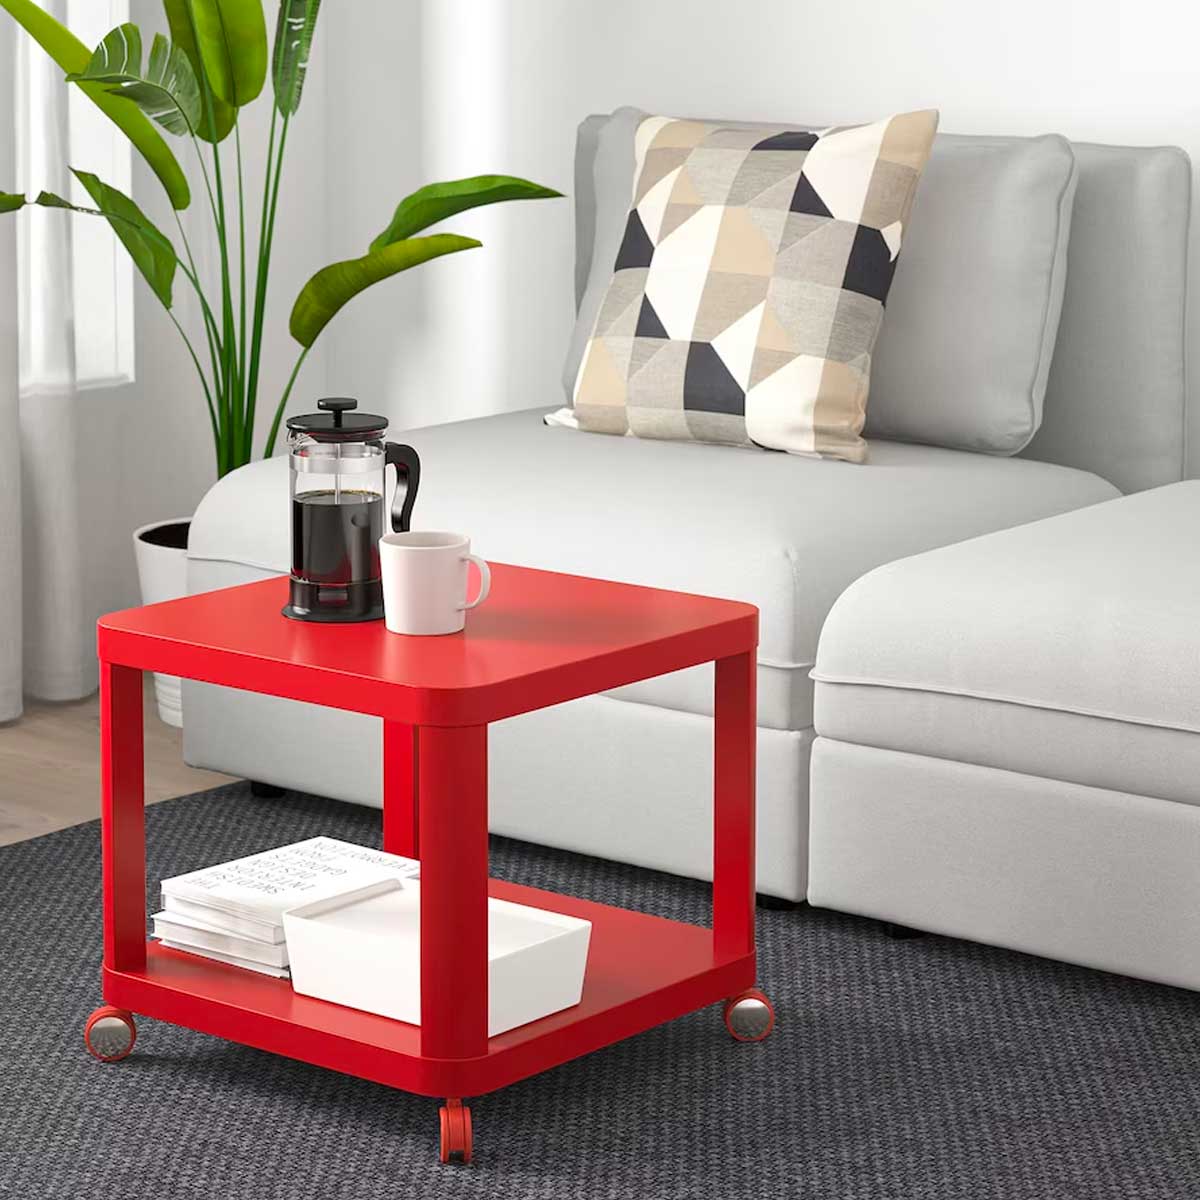 Tingby side table casters